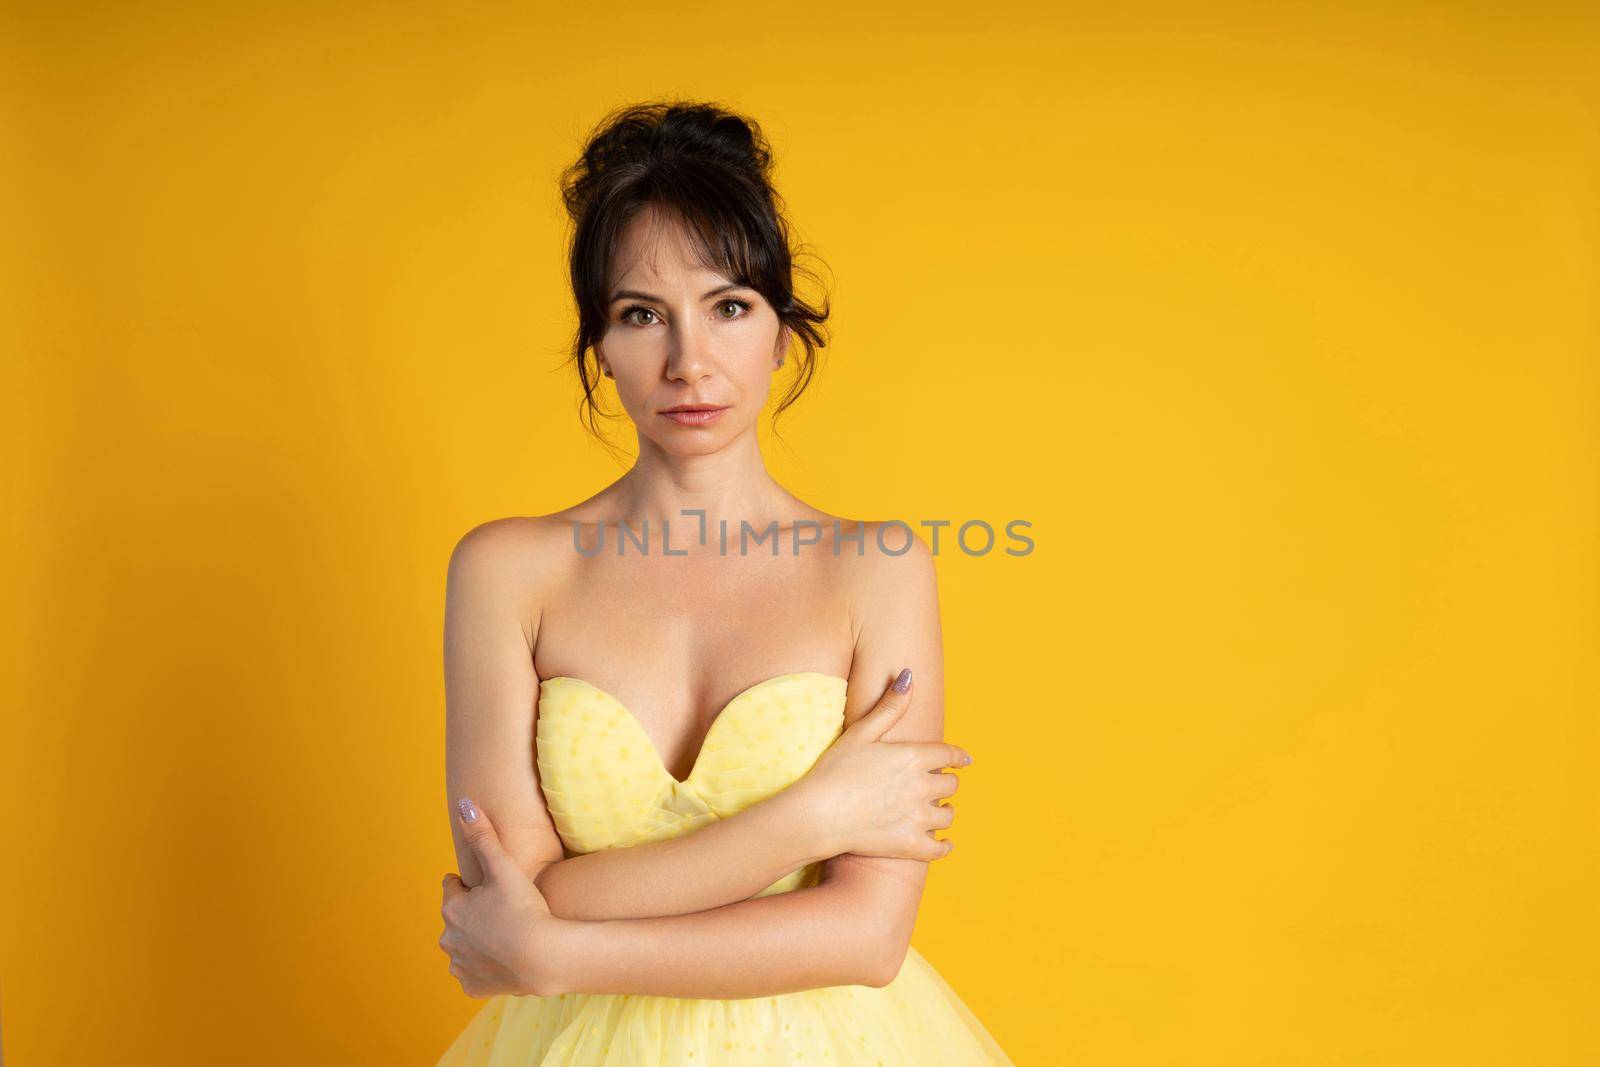 Portrait of a beautiful middle-aged woman in a yellow dress, her hair pulled up against a yellow background by Matiunina